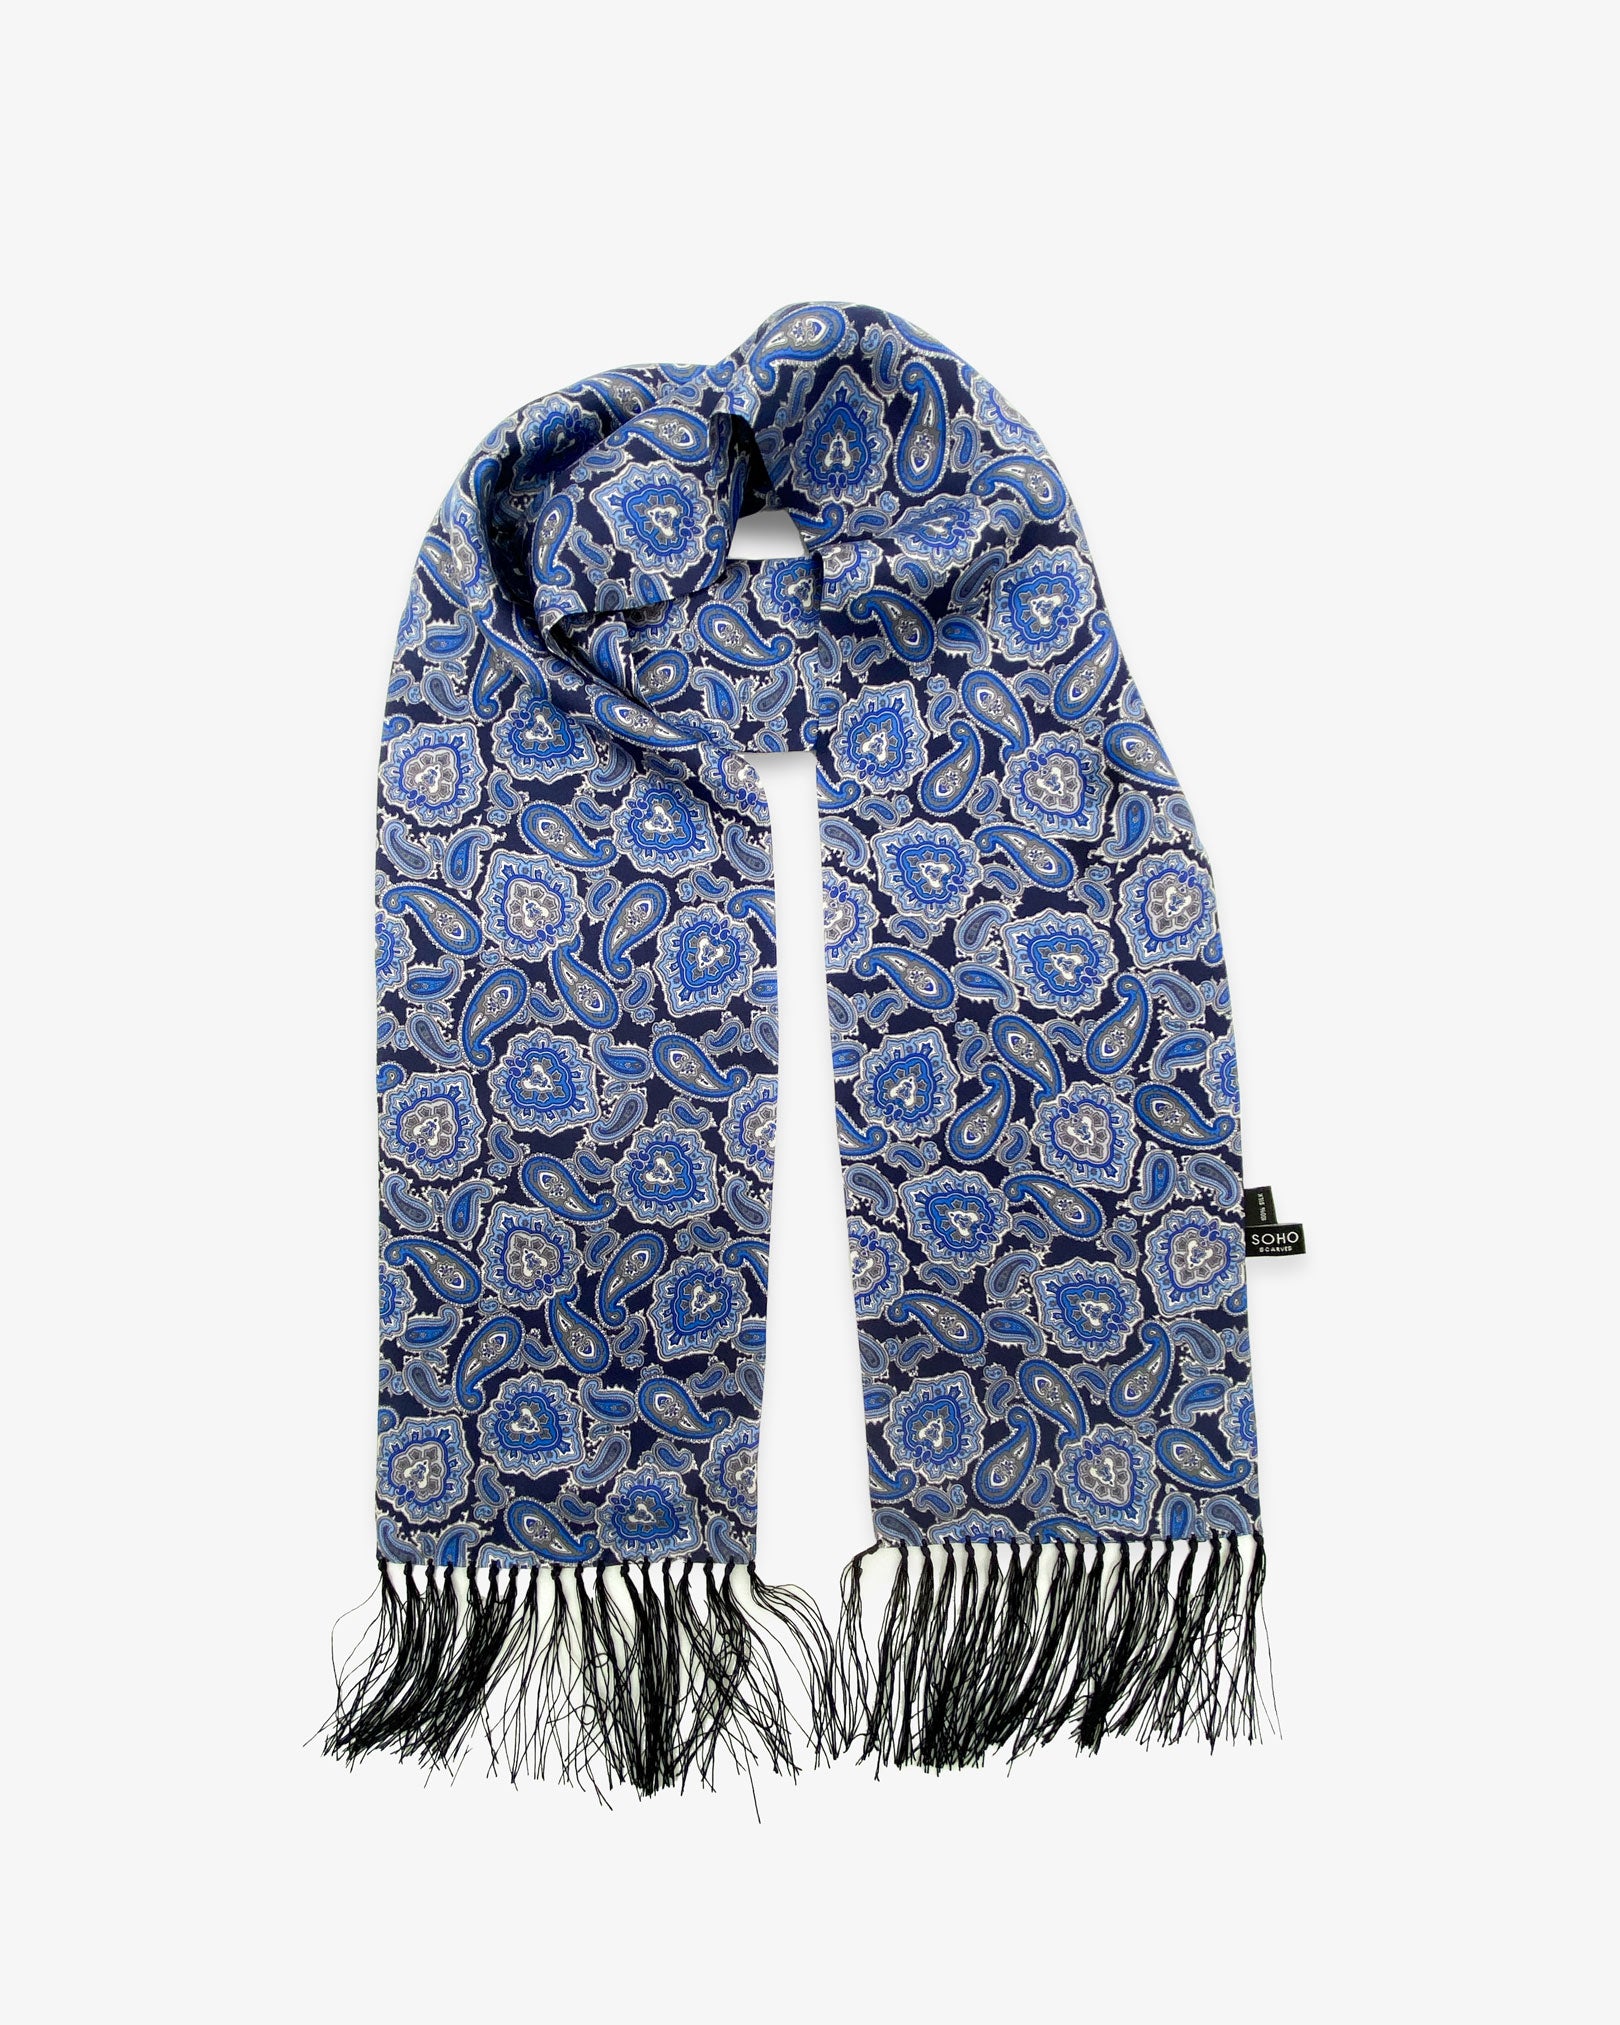 The Dezon pure silk aviator scarf looped in middle with both ends parallel showing the blue paisley patterns with matching 3-inch fringe.